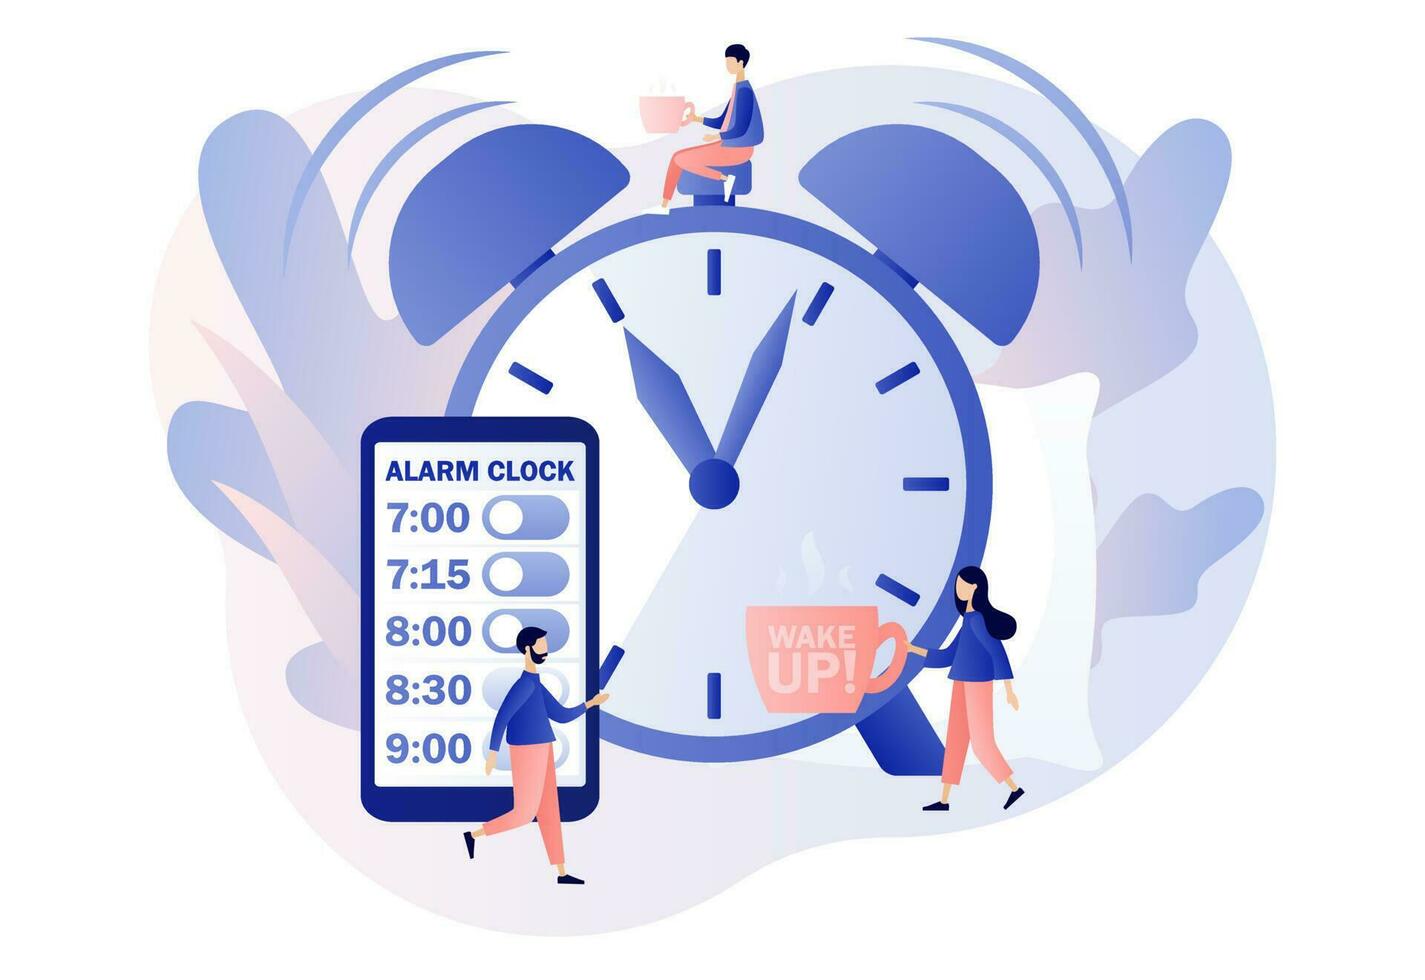 Alarm clock rings. Wake up. Good morning concept. Beginning of new day. Tiny people wake up in morning and follow routine of day. Modern flat cartoon style. Vector illustration on white background